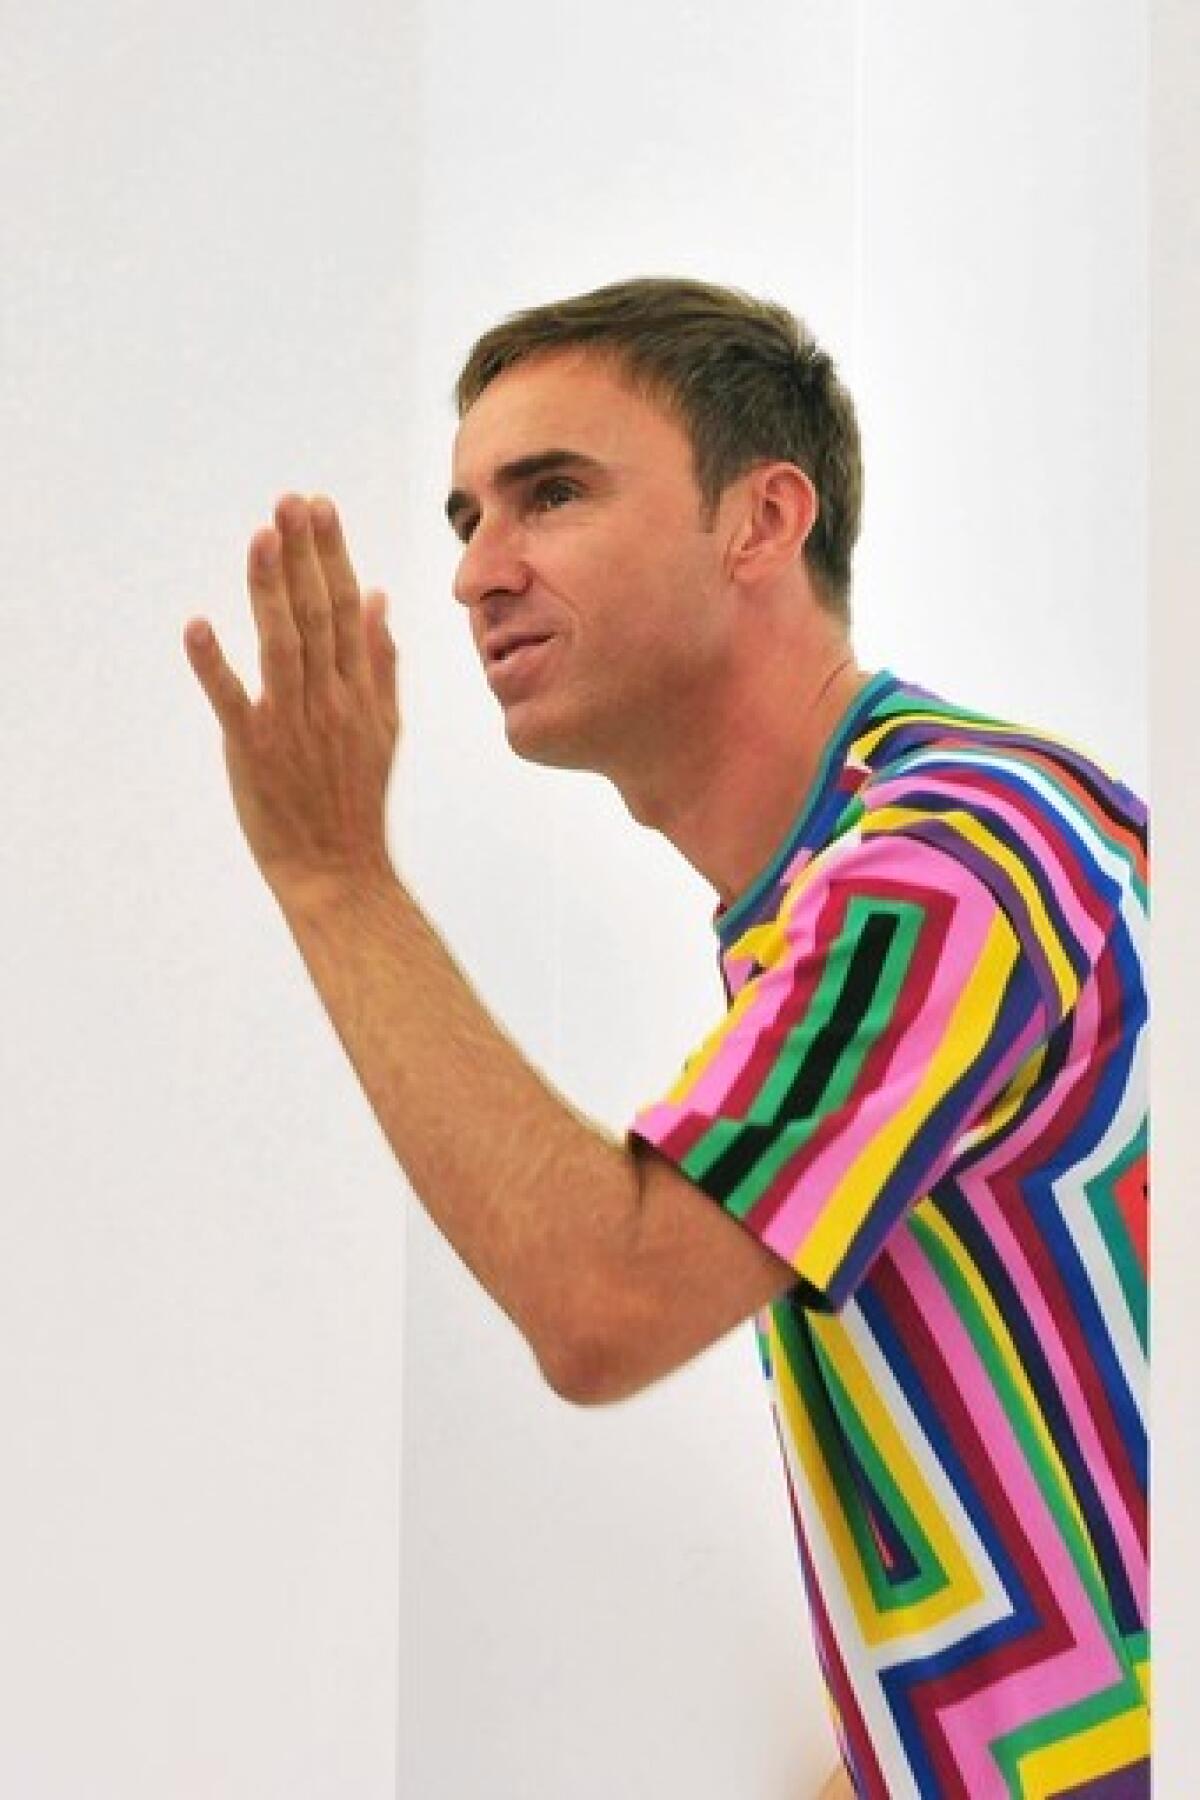 Belgian fashion designer Raf Simons acknowledges the audience at the end of Jil Sander Spring-Summer 2012 ready-to-wear collection on September 24, 2011 during the Women's Mialn fashion week.